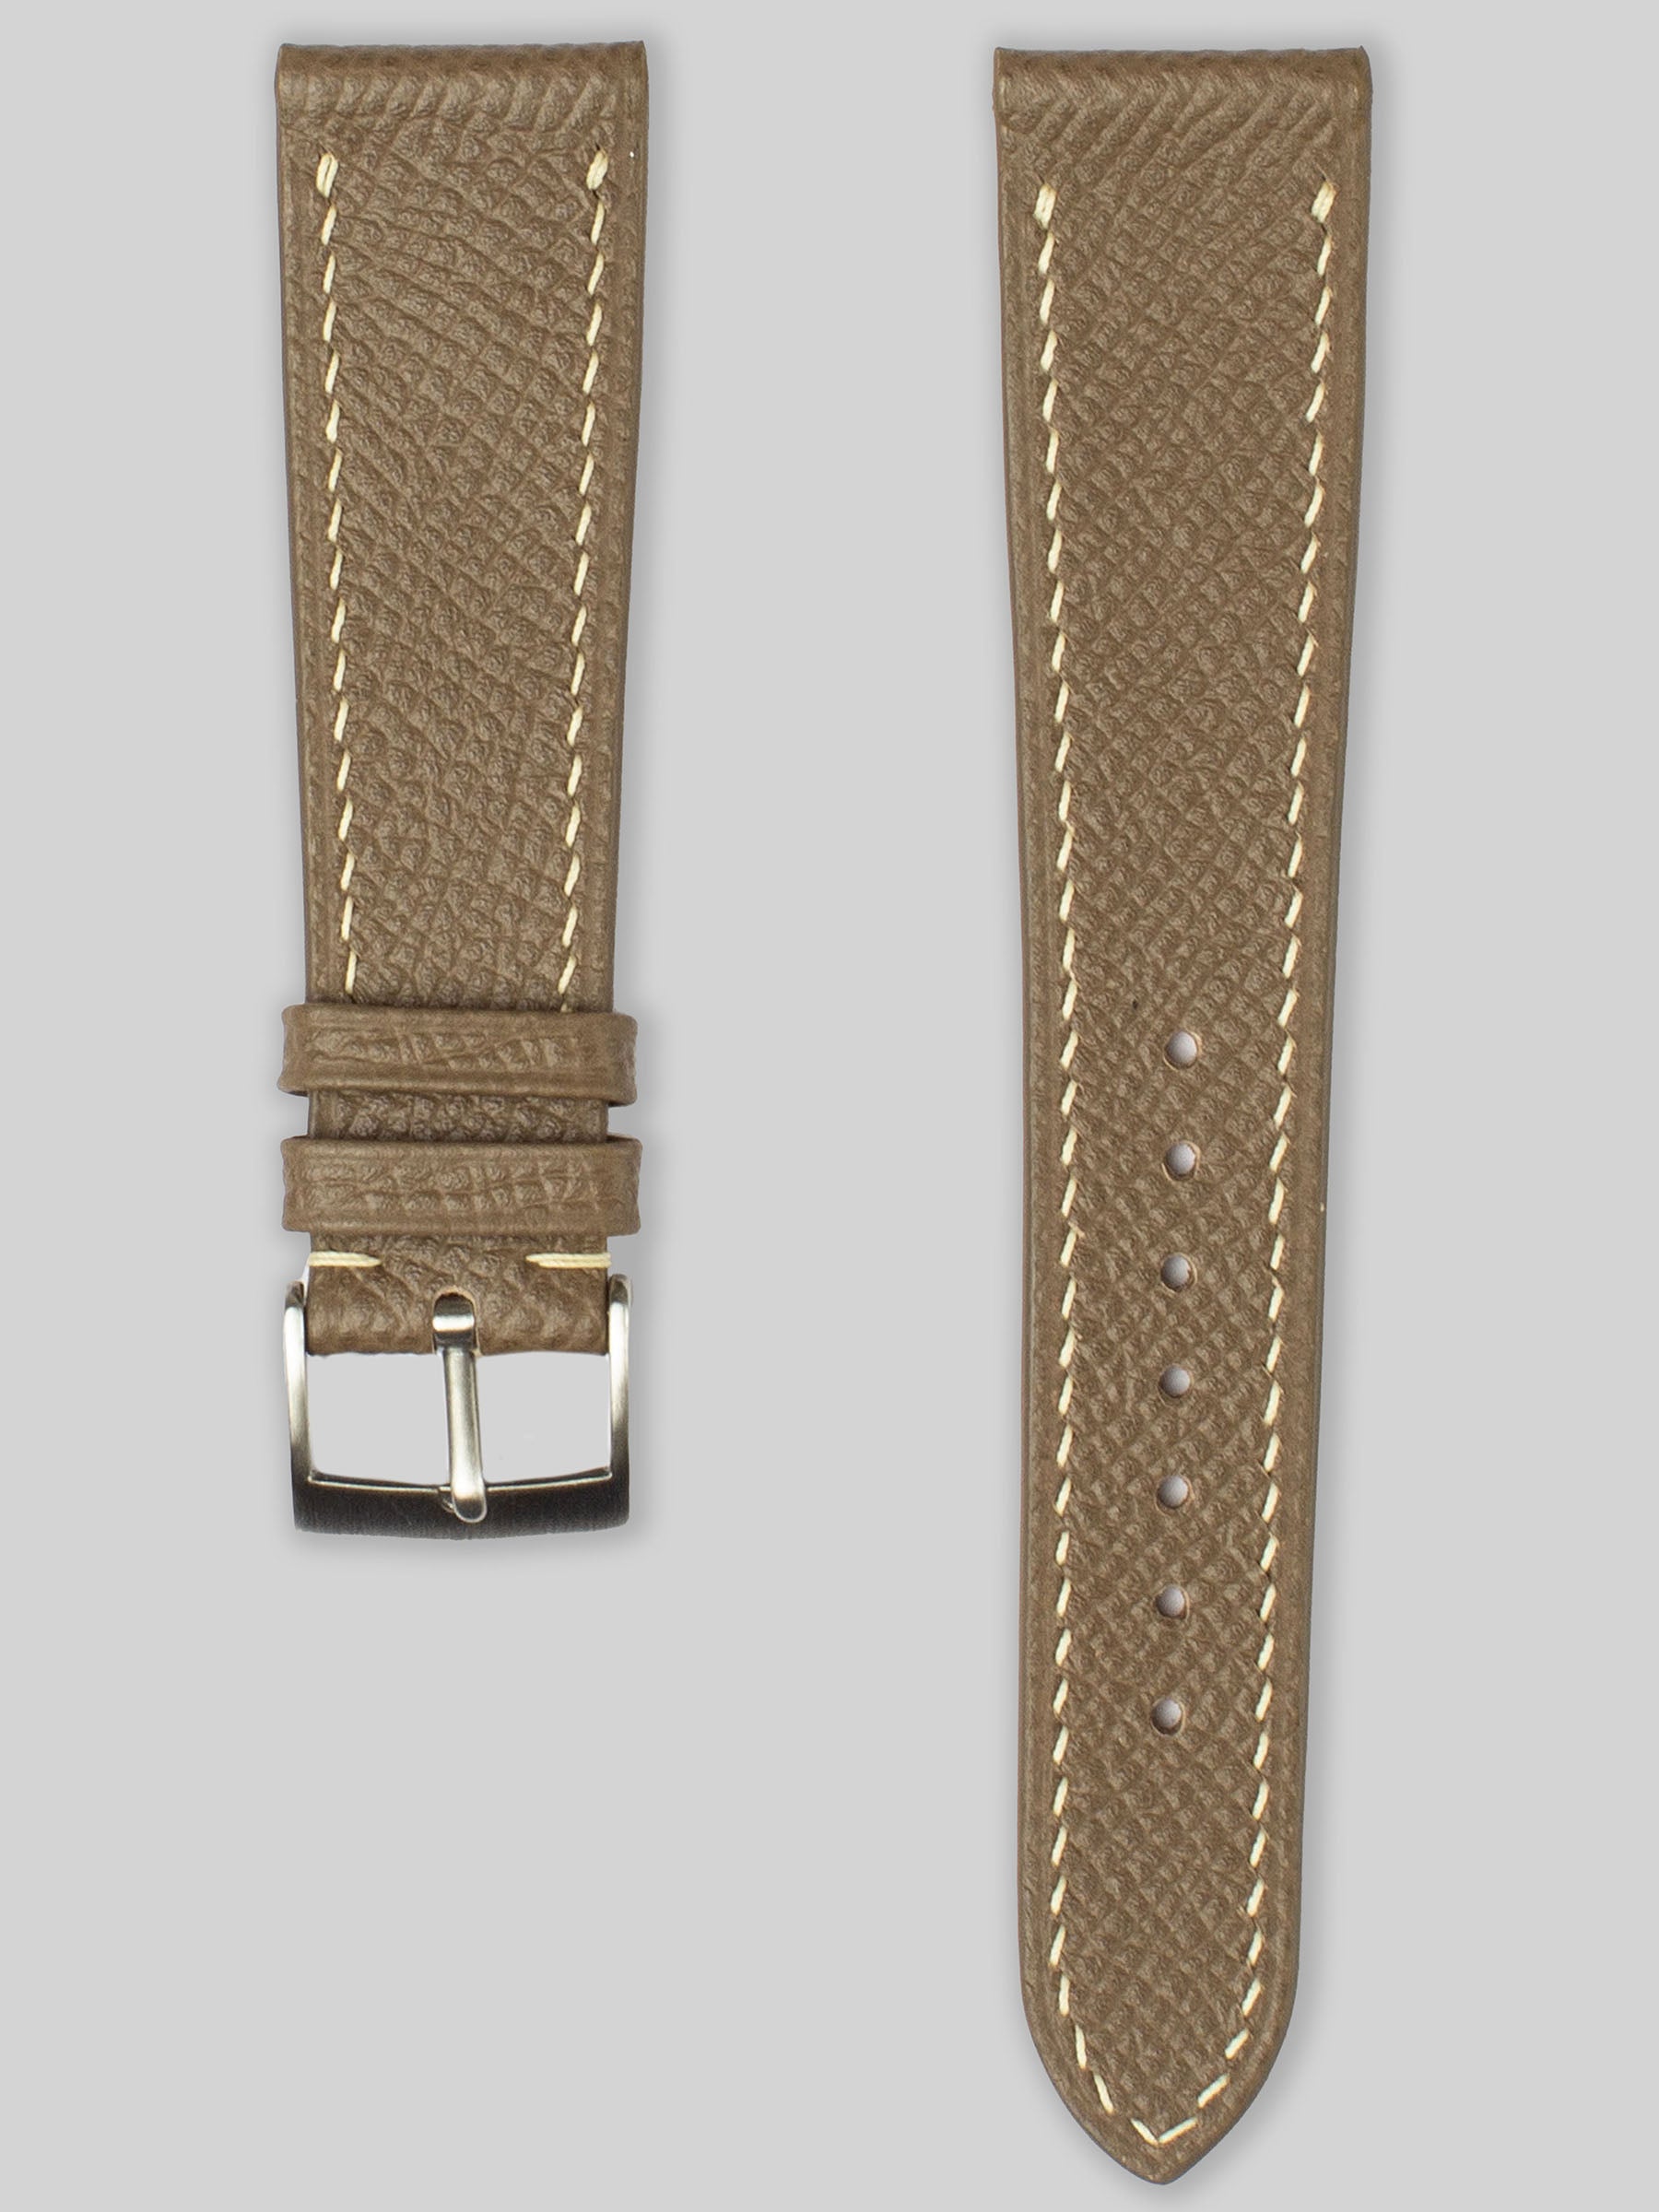 Textured Calfskin Leather Watch Strap - Taupe